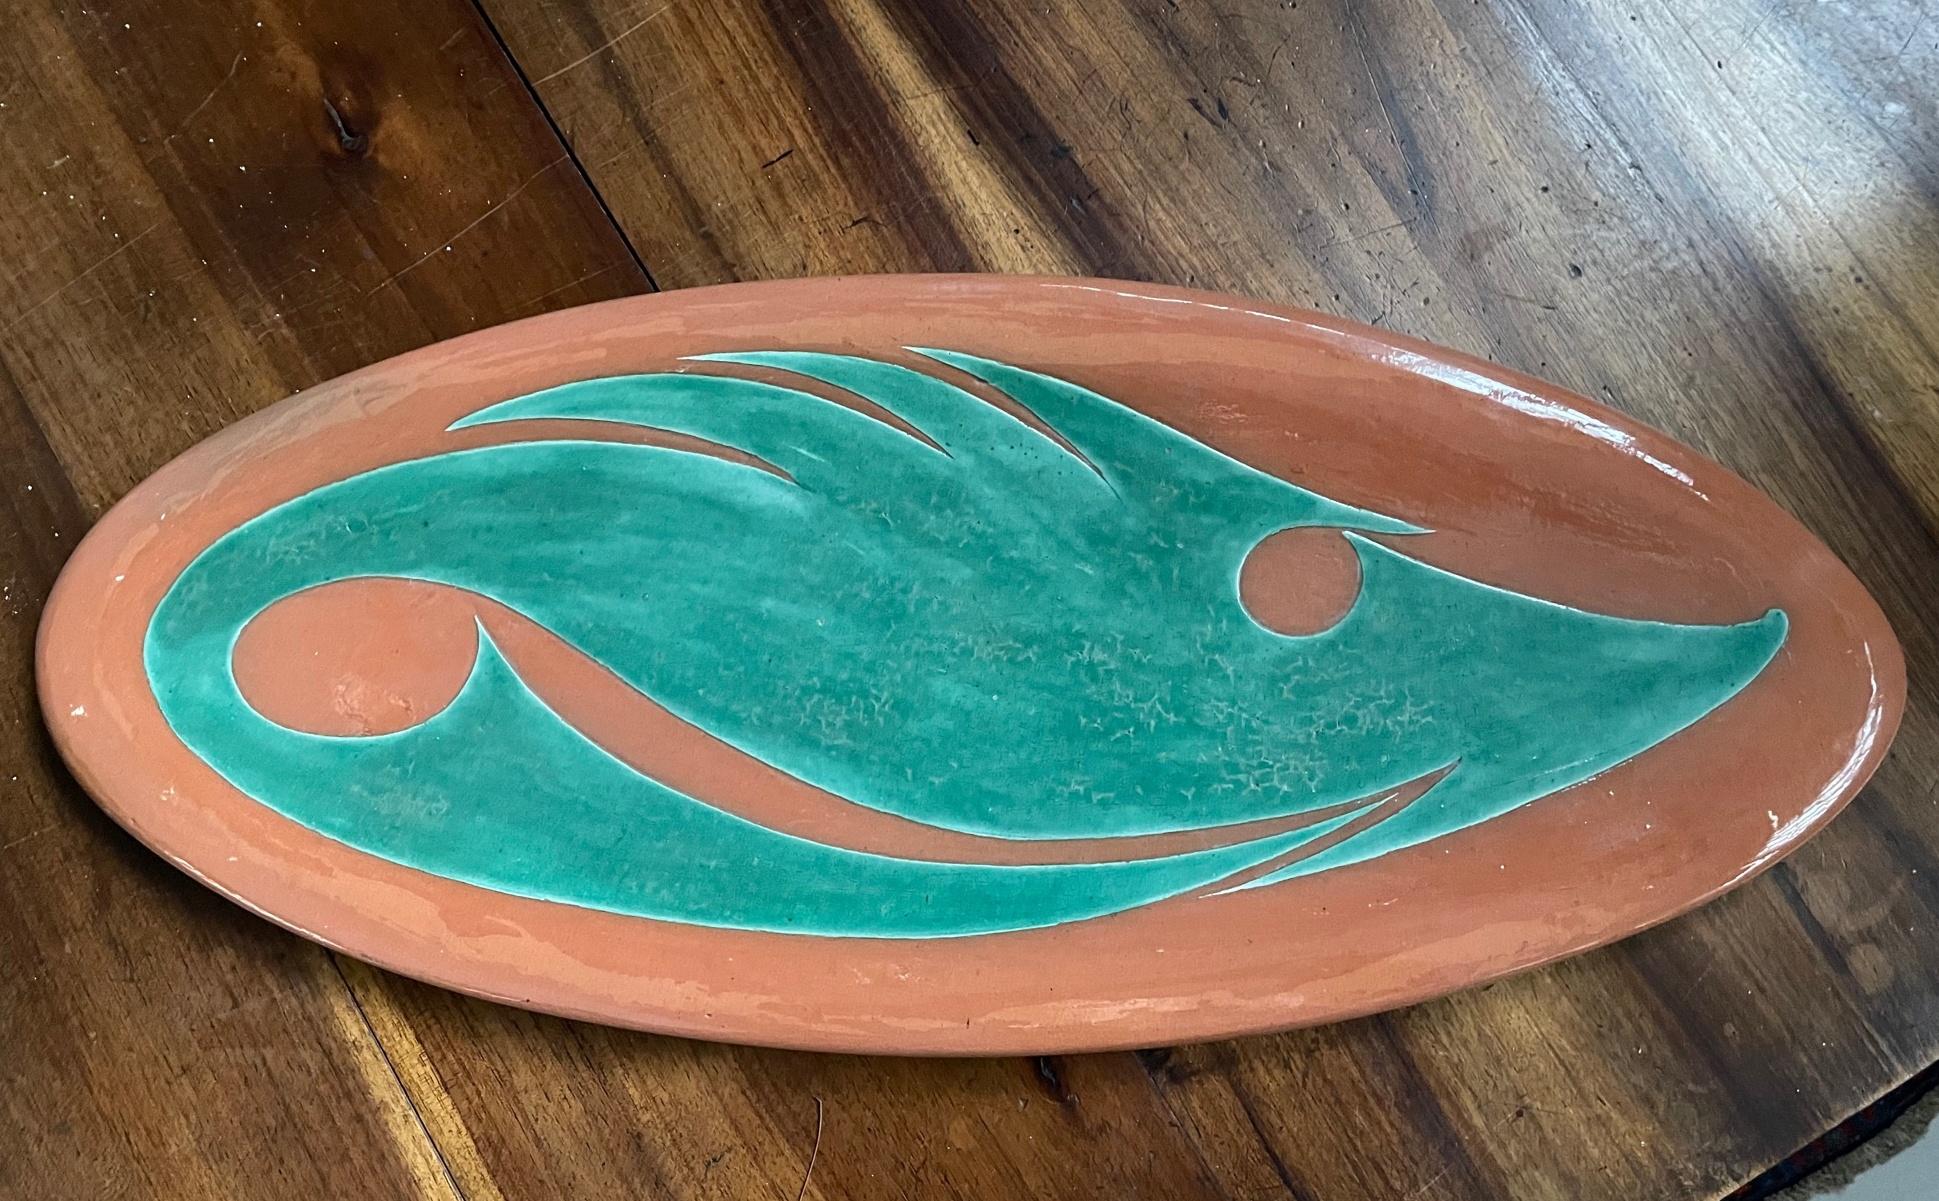 An early French, c.1950, polychrome ceramic platter by master ceramist André Aleth Masson, of oblong organic shape decorated with stylized fish in green, signed and dated 1951 and with triskel on the back.